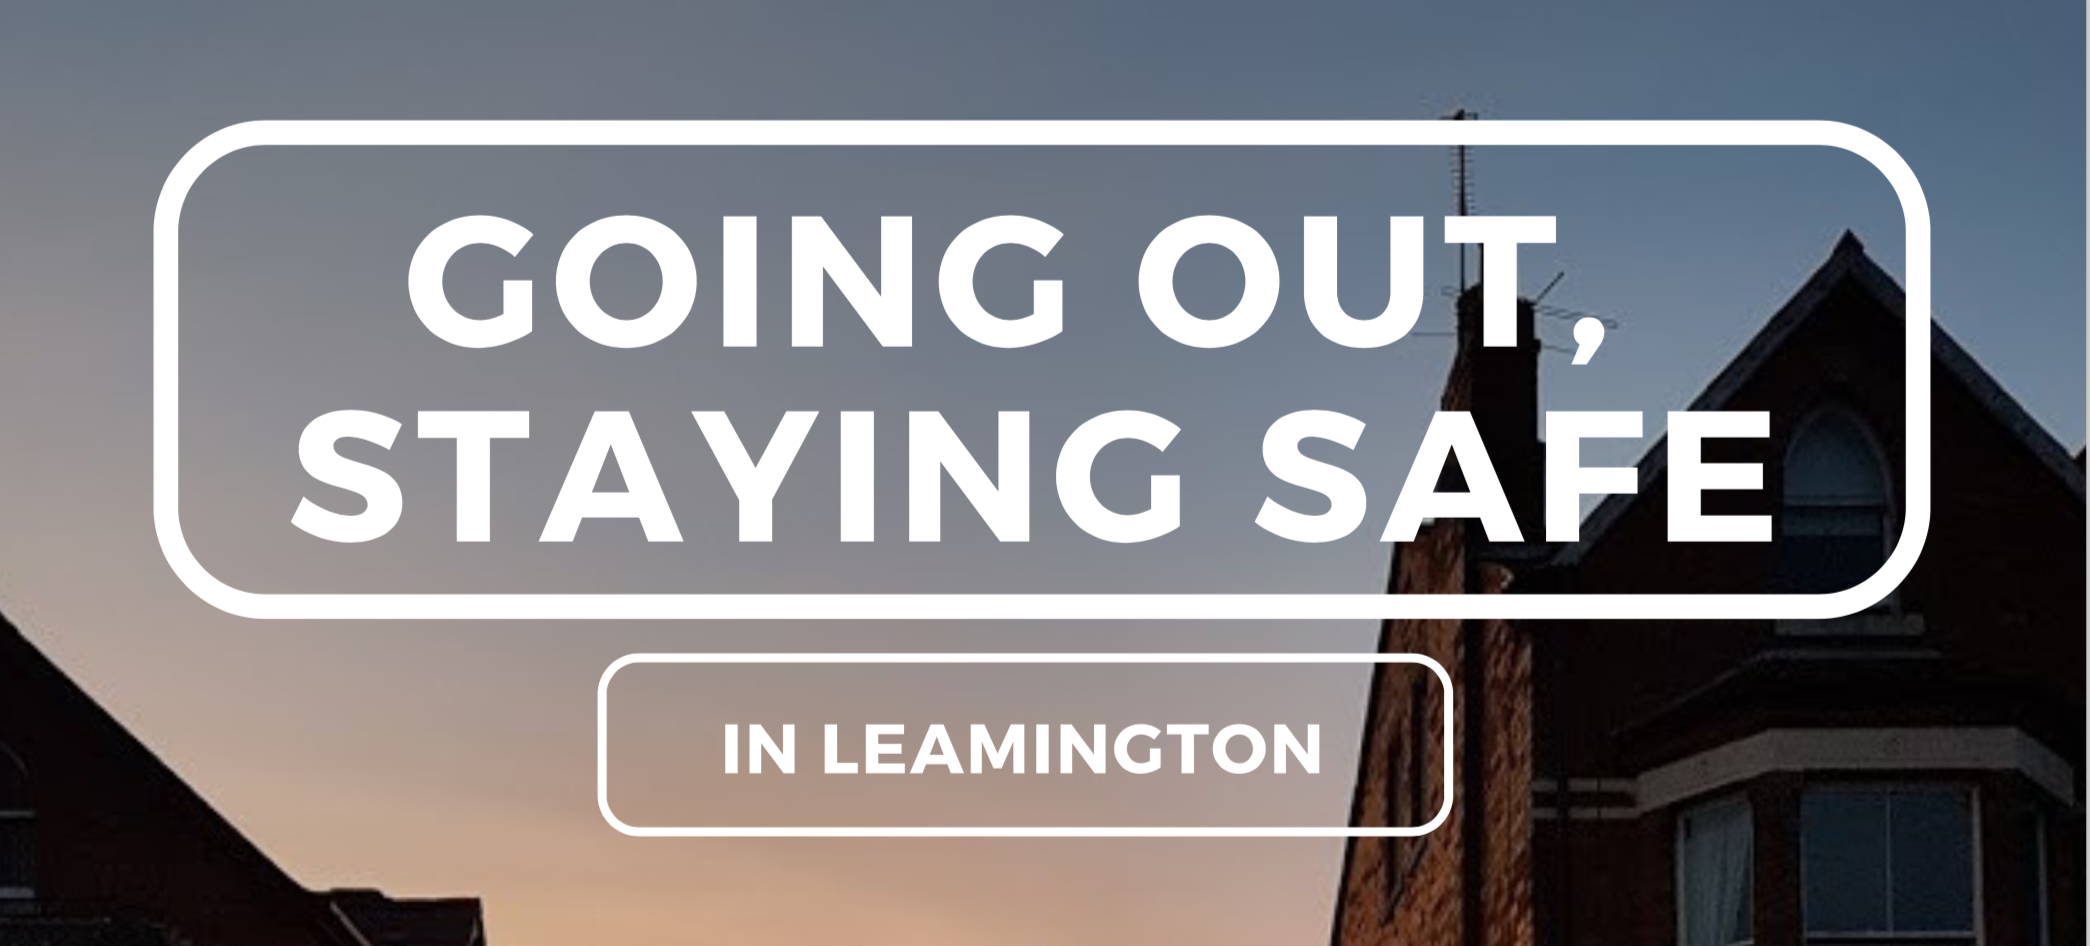 Going Out Staying Safe banner